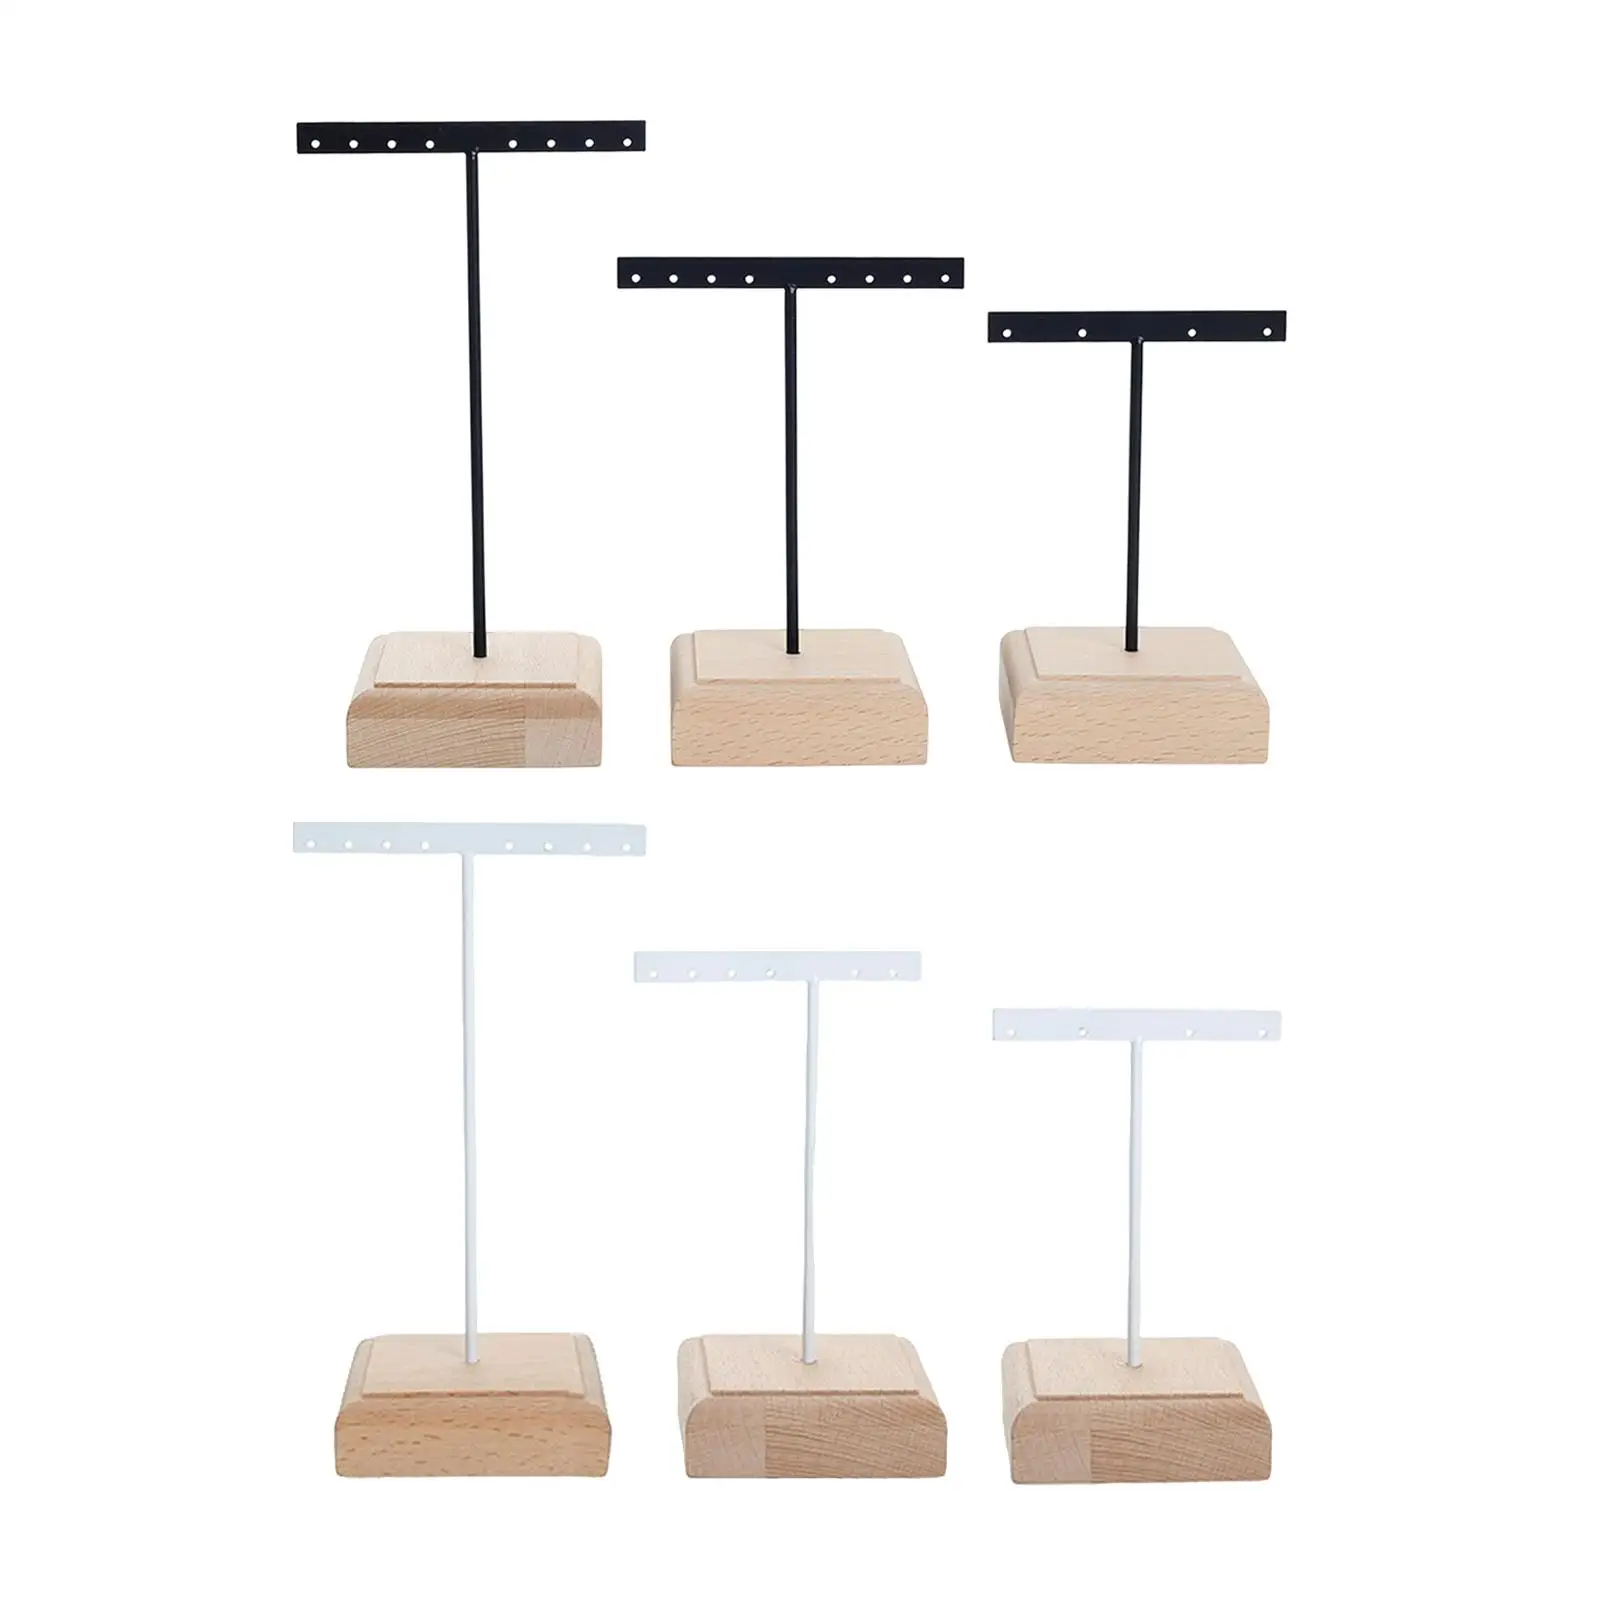 

3 Pieces T Bar Earrings Display Stand Wooden Base Hanging Rack Jewelry Organizer for Bangles Selling Retail Showroom Show Shops